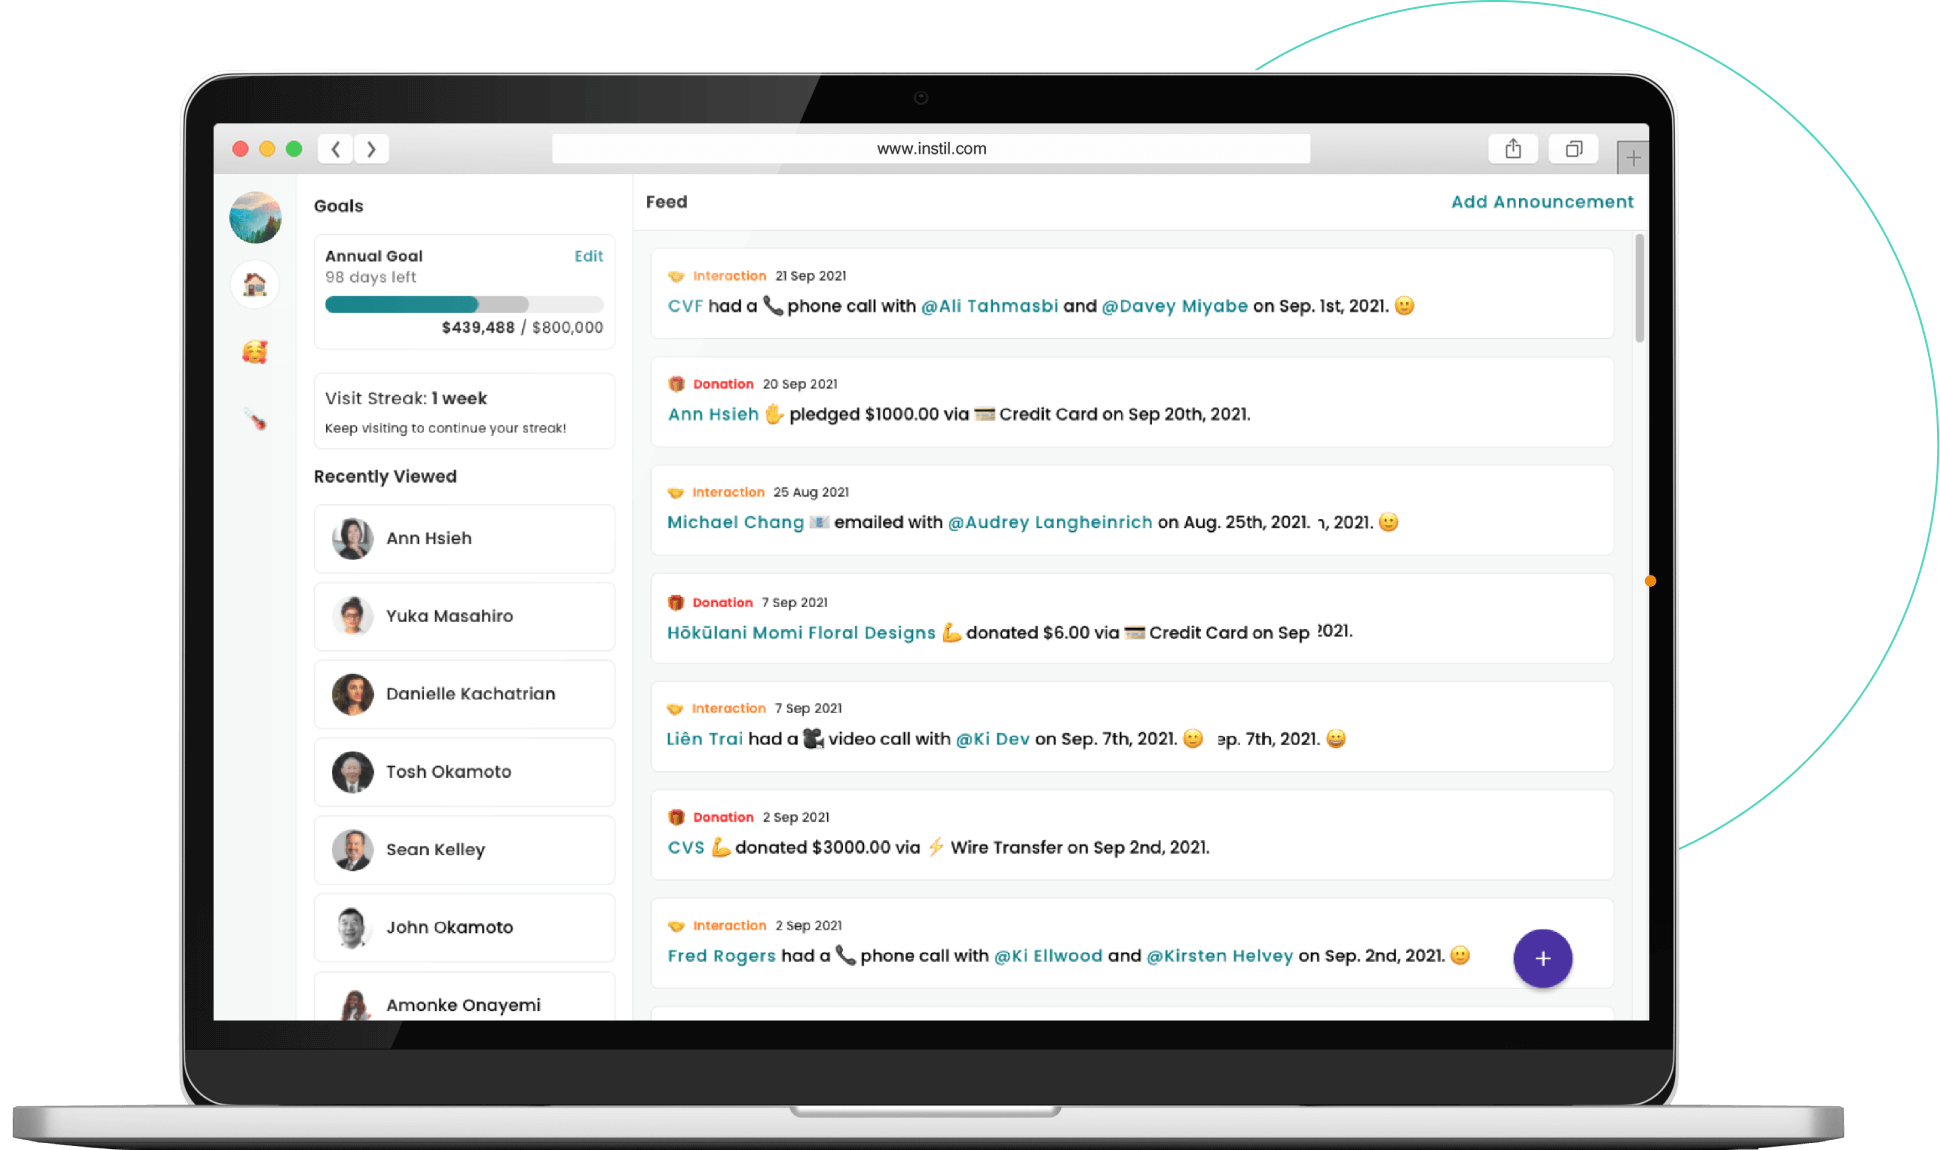 Instil's activity feed keeps you up-to-date on all of your organization's activities and supporter interactions.